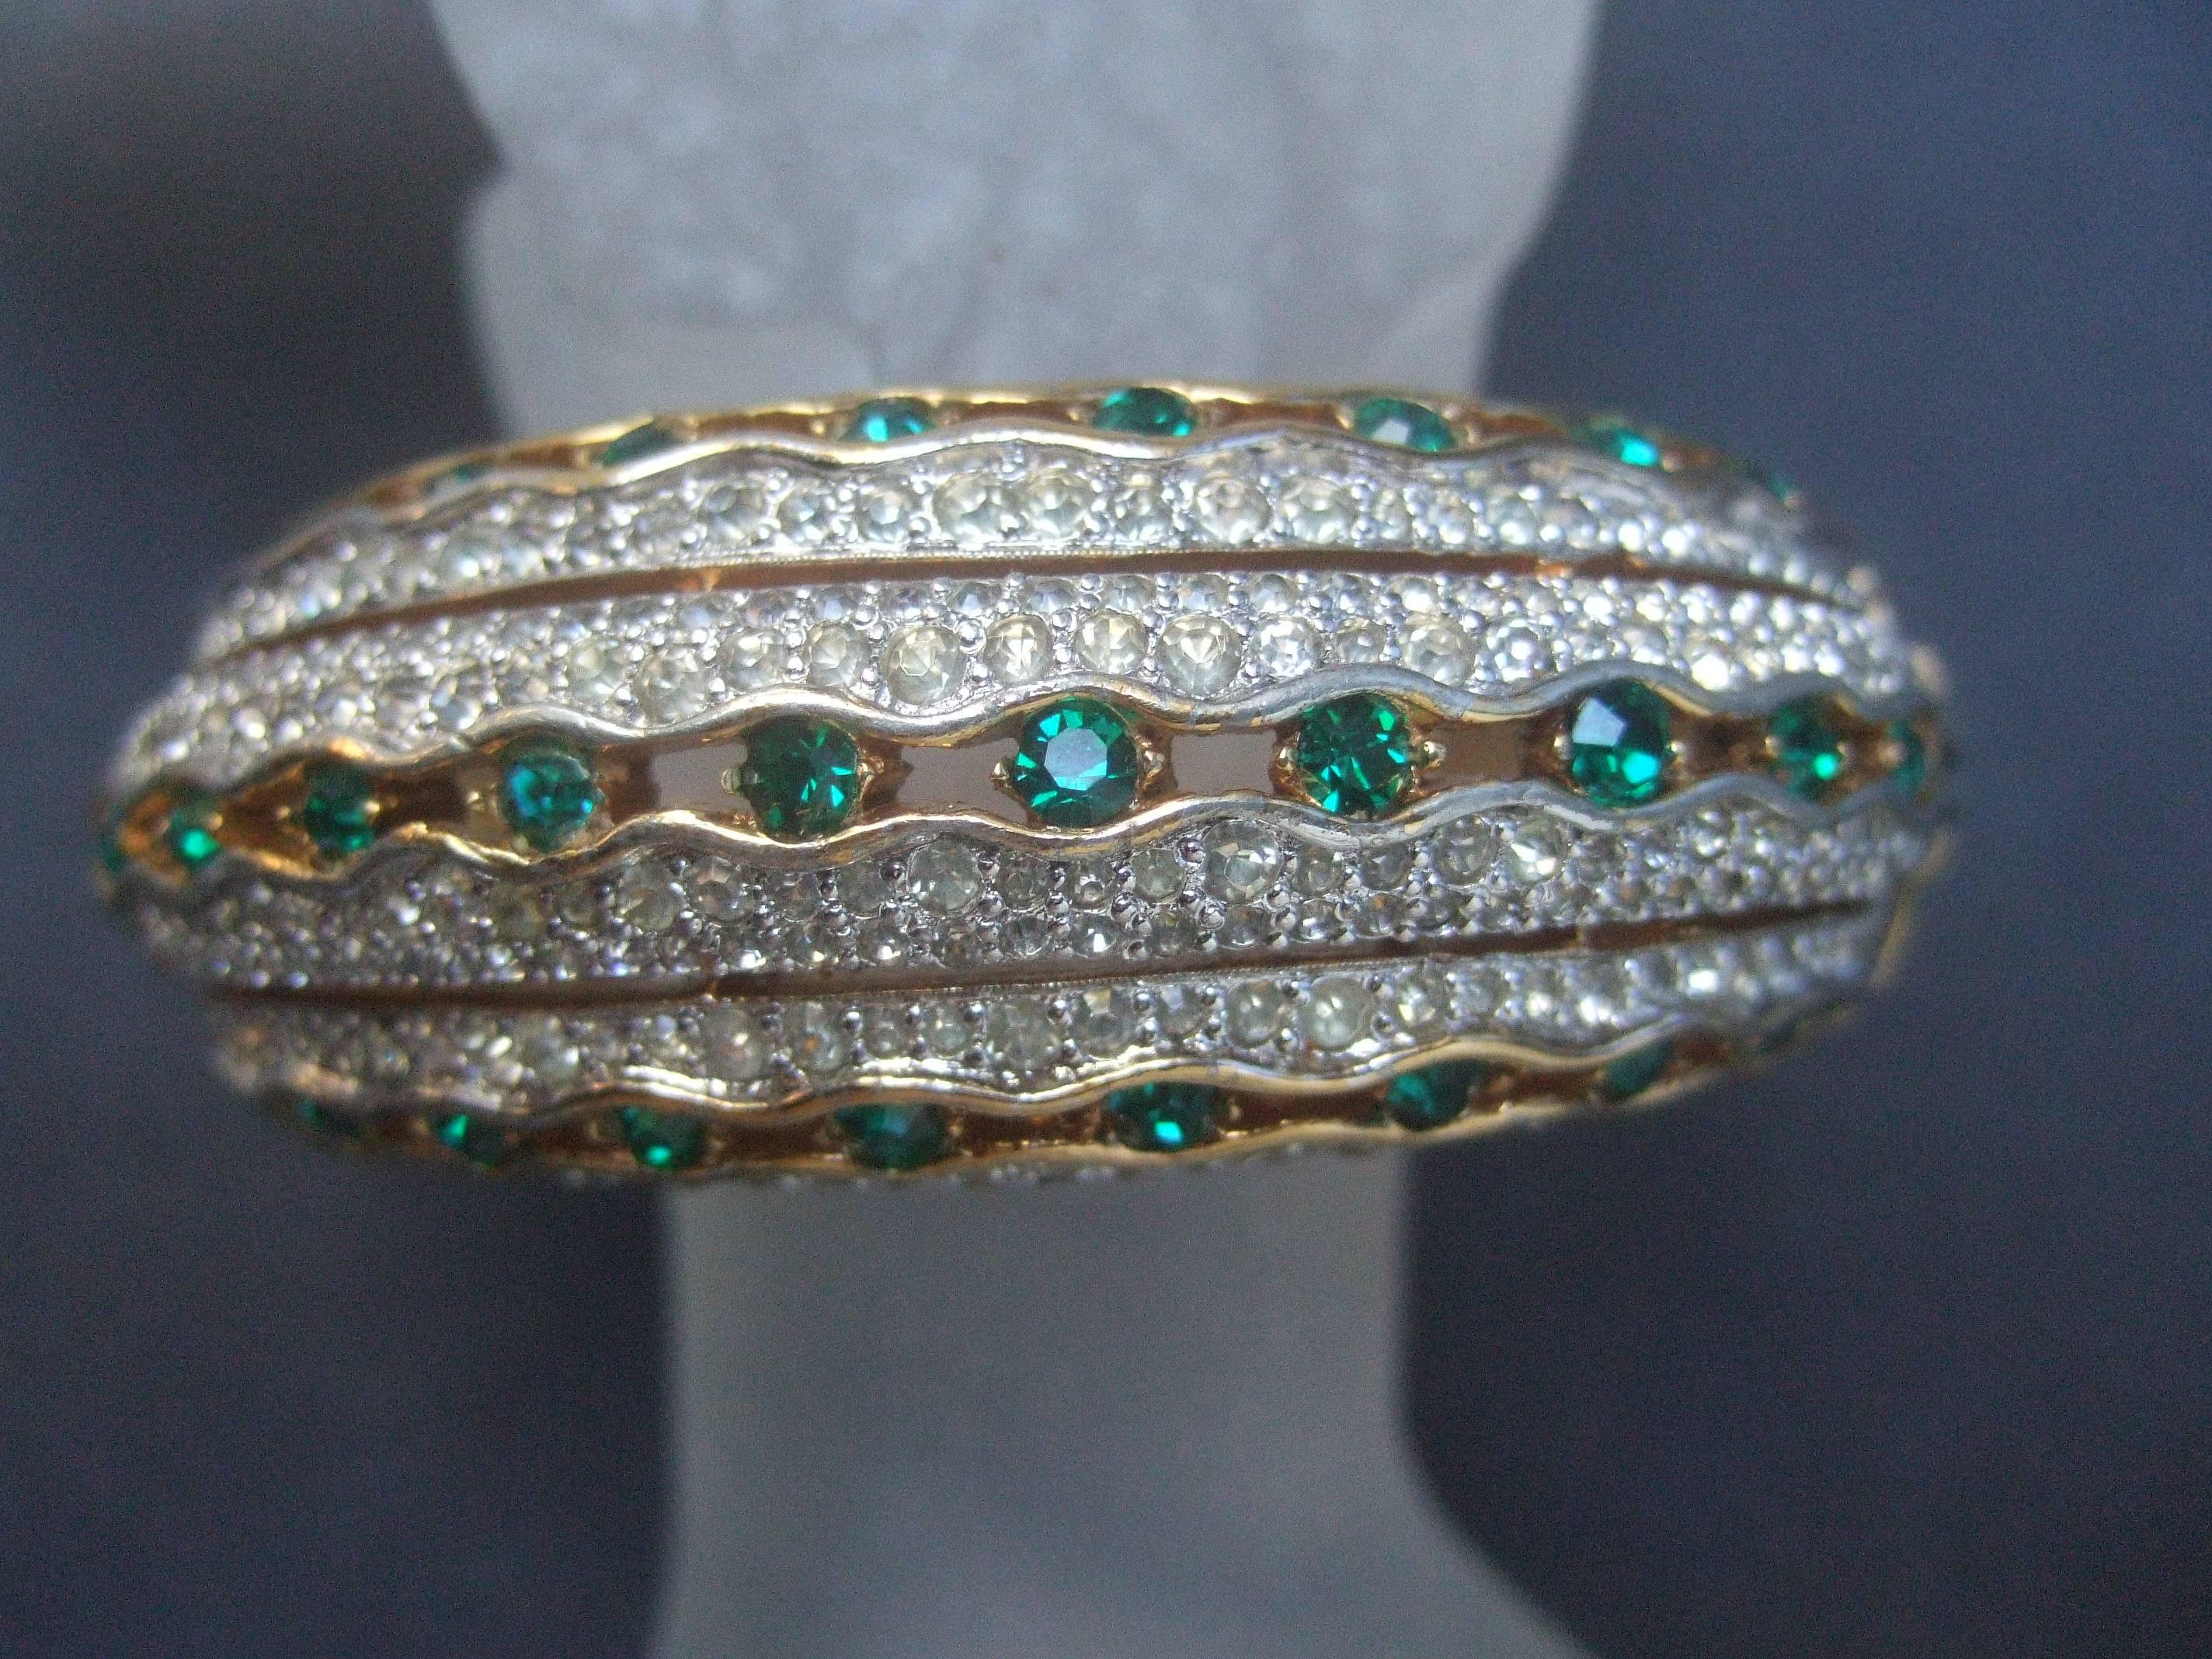 Jomaz Crystal encrusted wide gilt metal hinged bangle c 1970
The exquisite bracelet is designed with three bands 
of emerald green color crystals 

Embellished with six sections of contiguous pave crystals 
Joseph Mazer was one of the preeminent